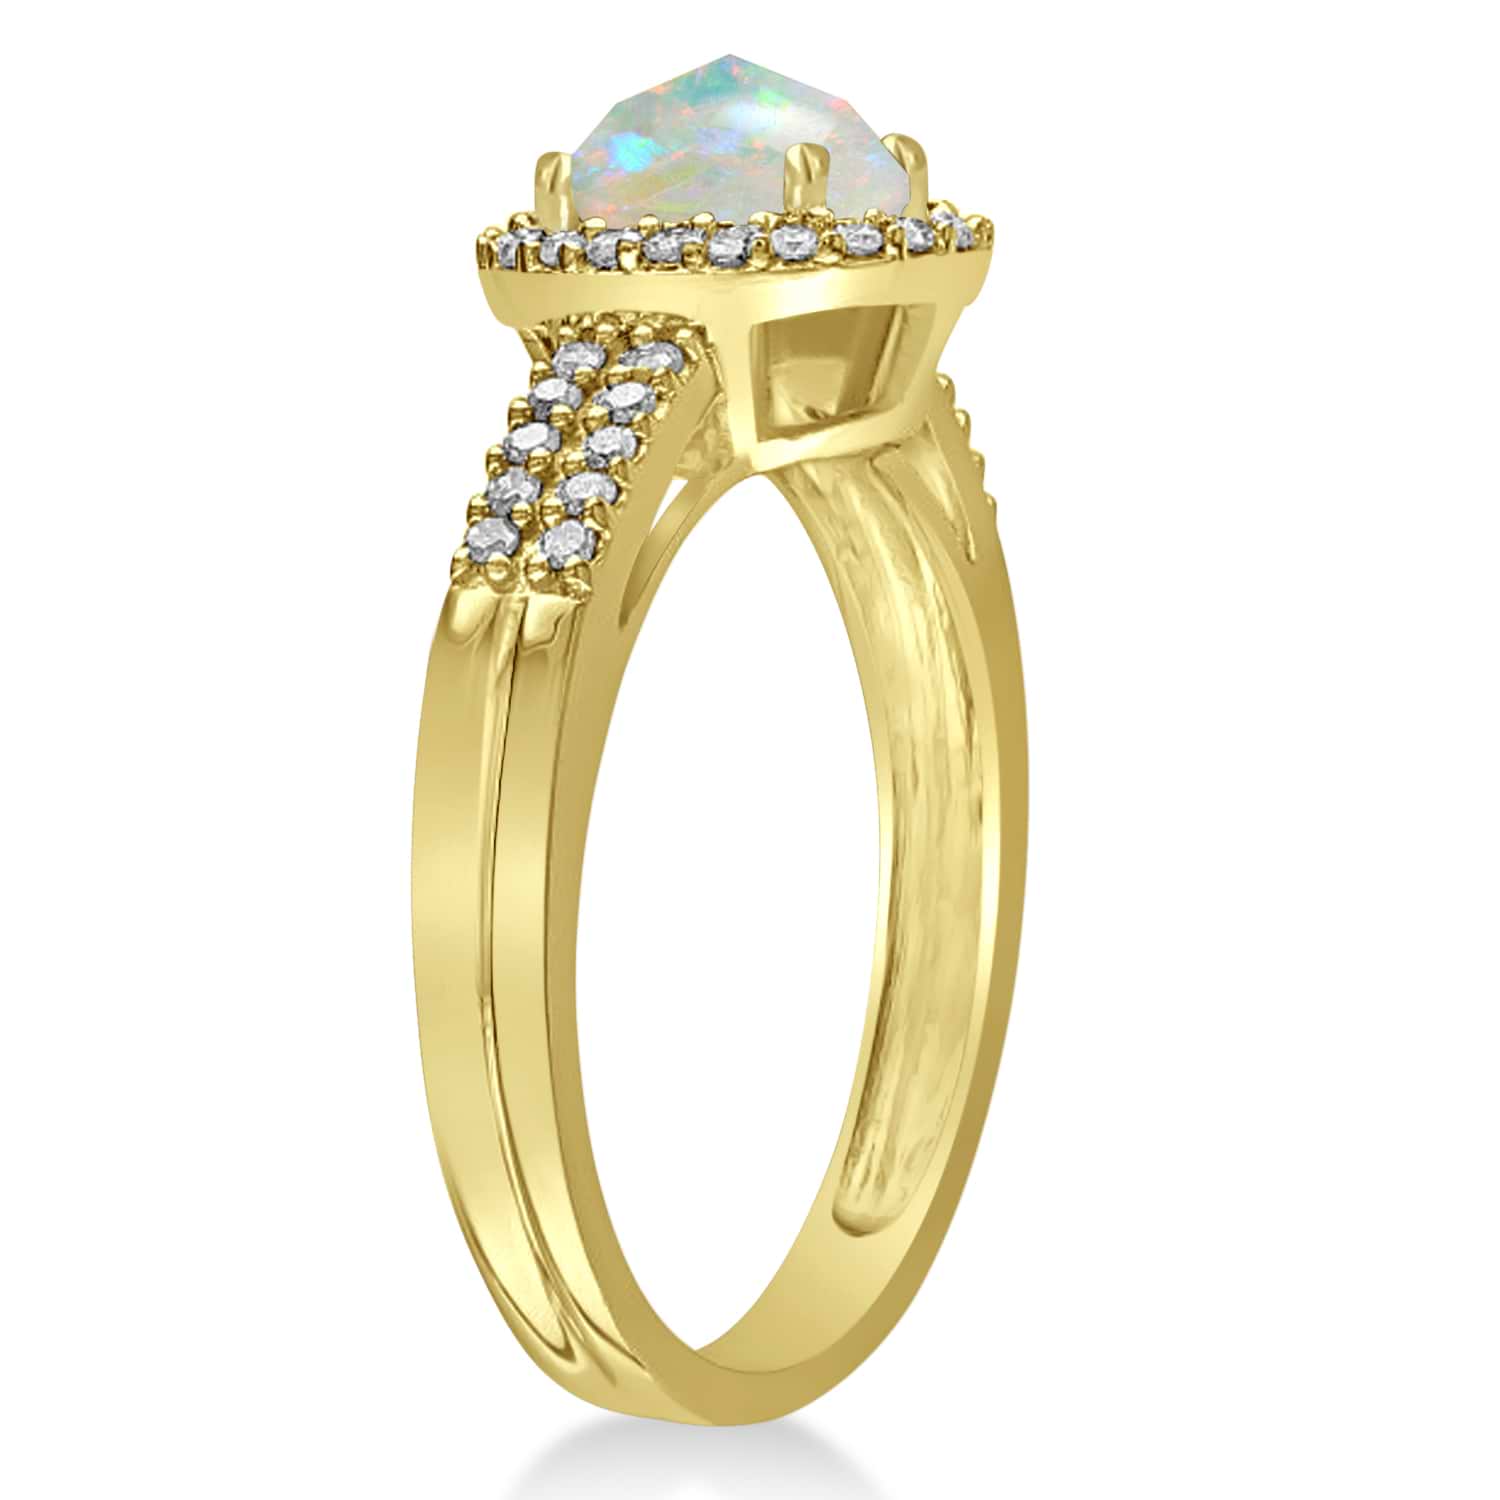 Opal & Diamond Oval Engagement Ring 14k Yellow Gold (1.01ct)